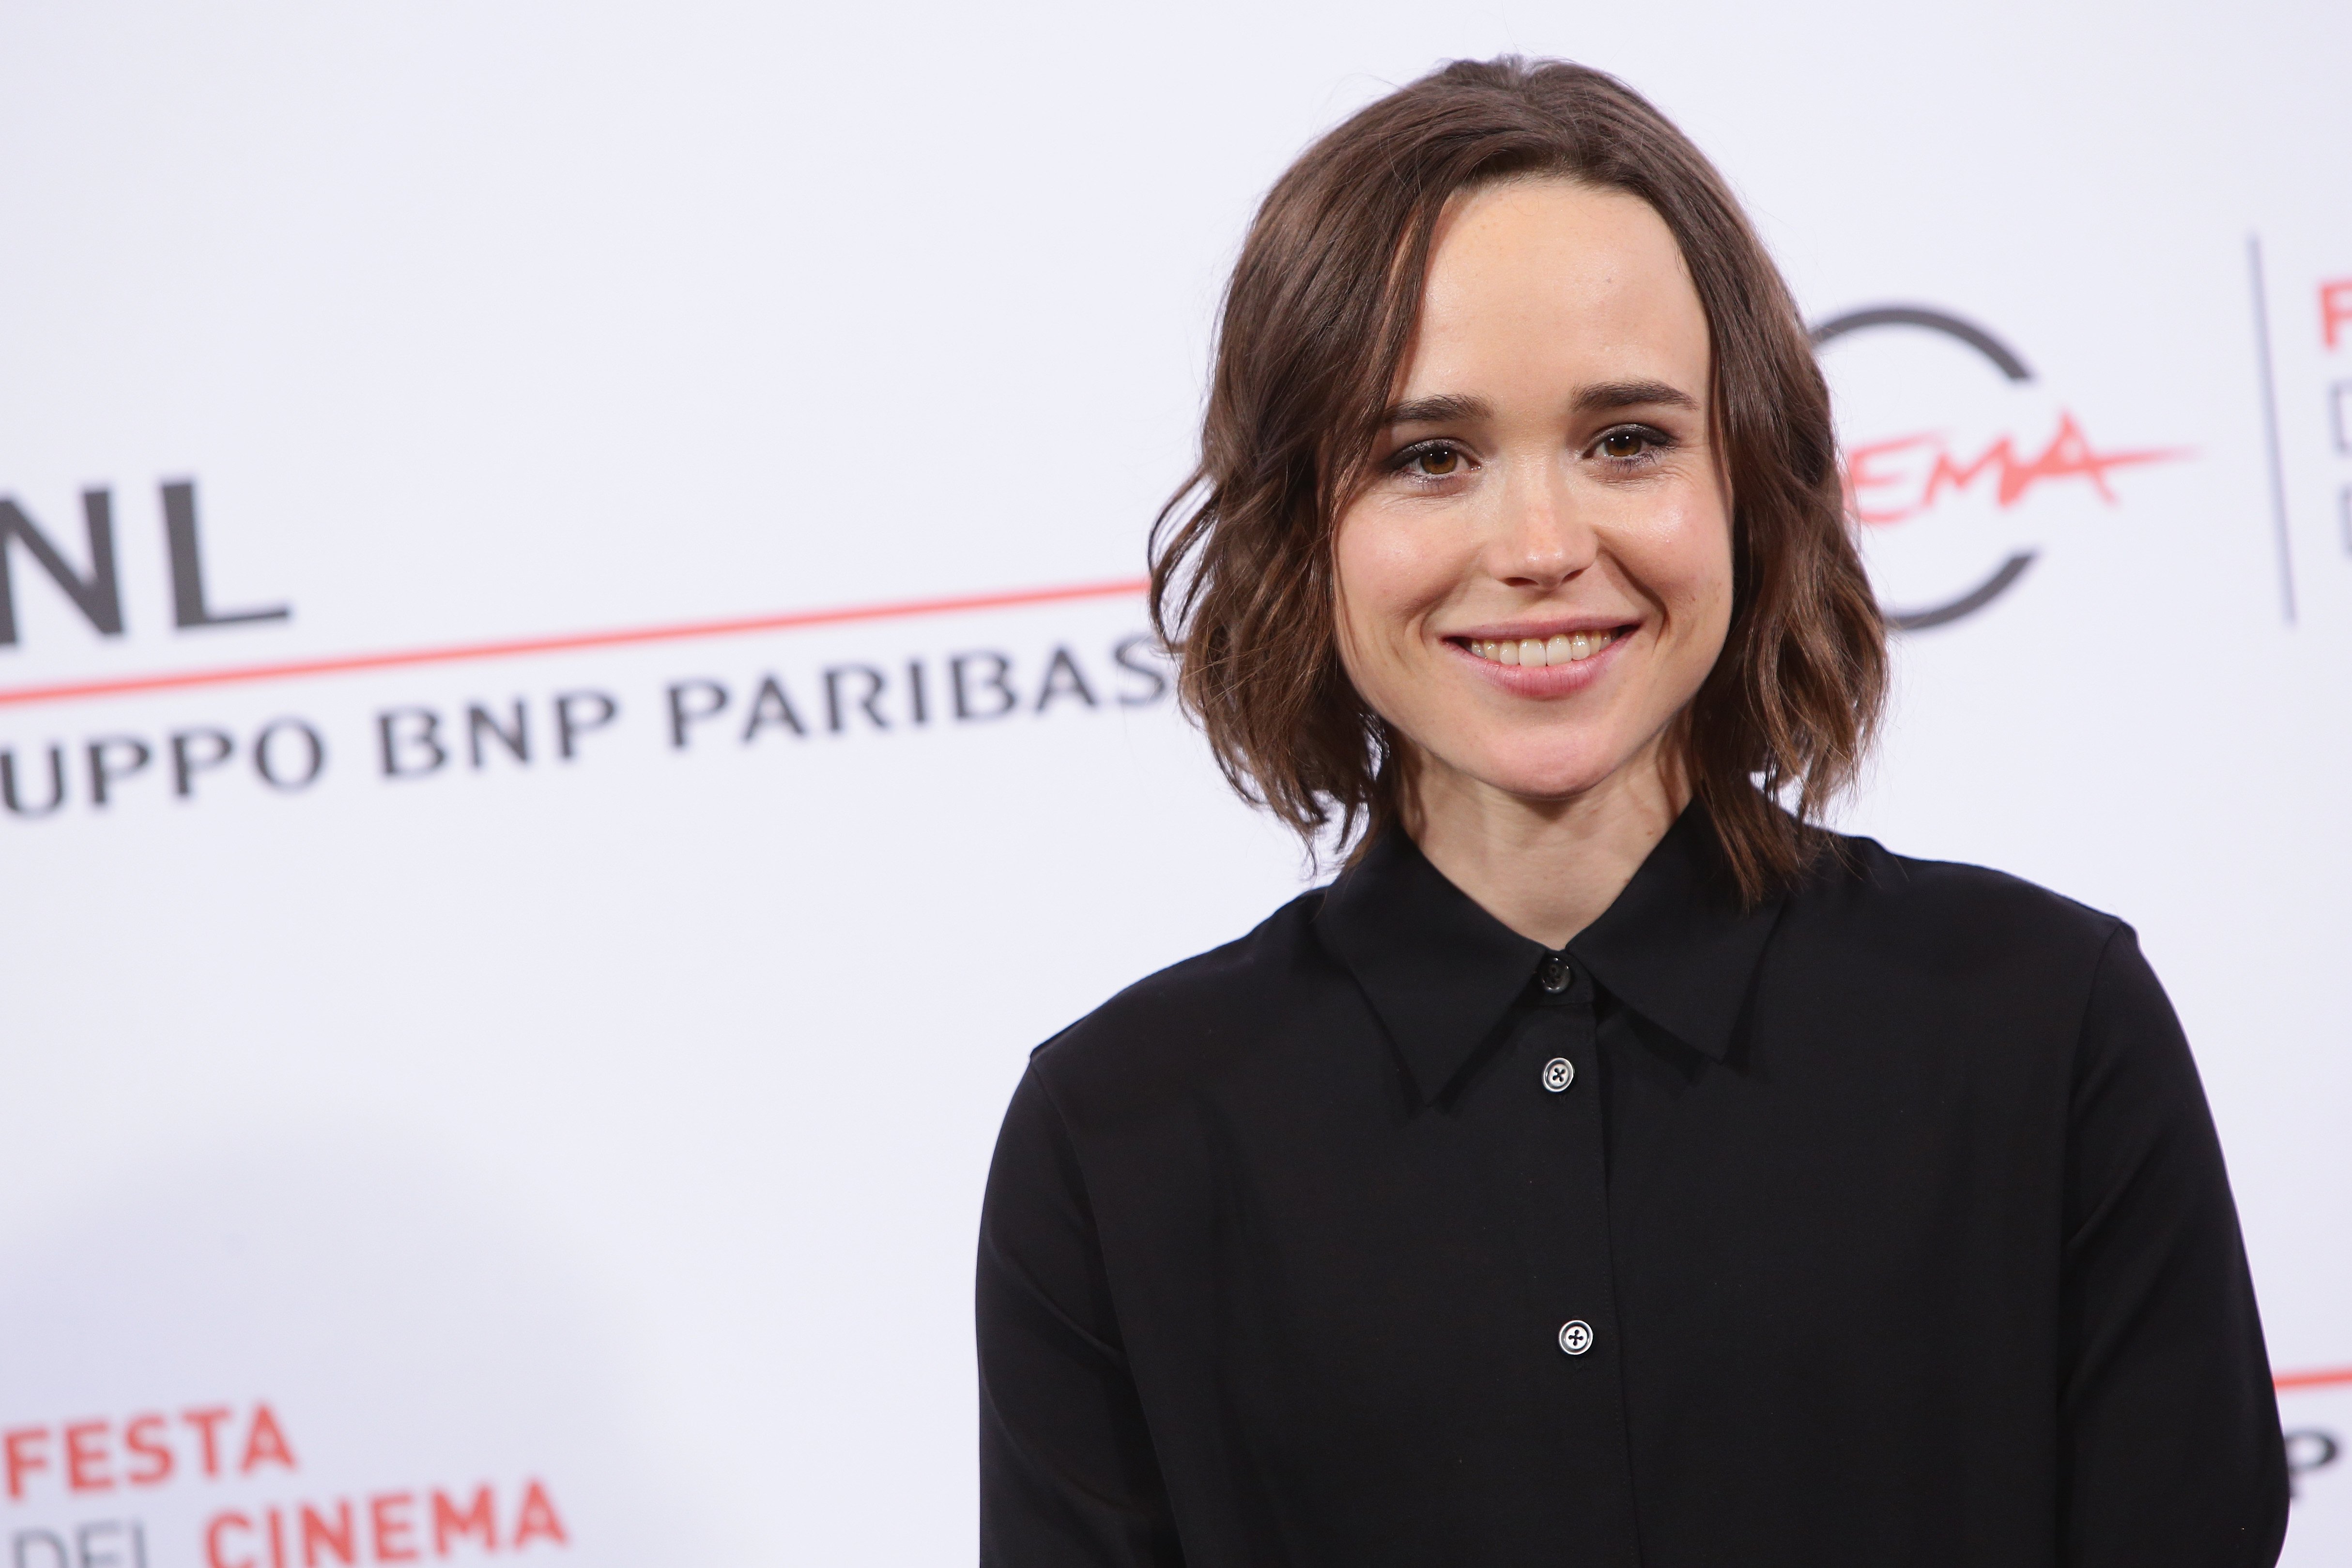 Ellen Page attends a photocall for "Freeheld" during the 10th Rome Film Fest on October 18, 2015 in Rome, Italy. | Photo: Getty Images